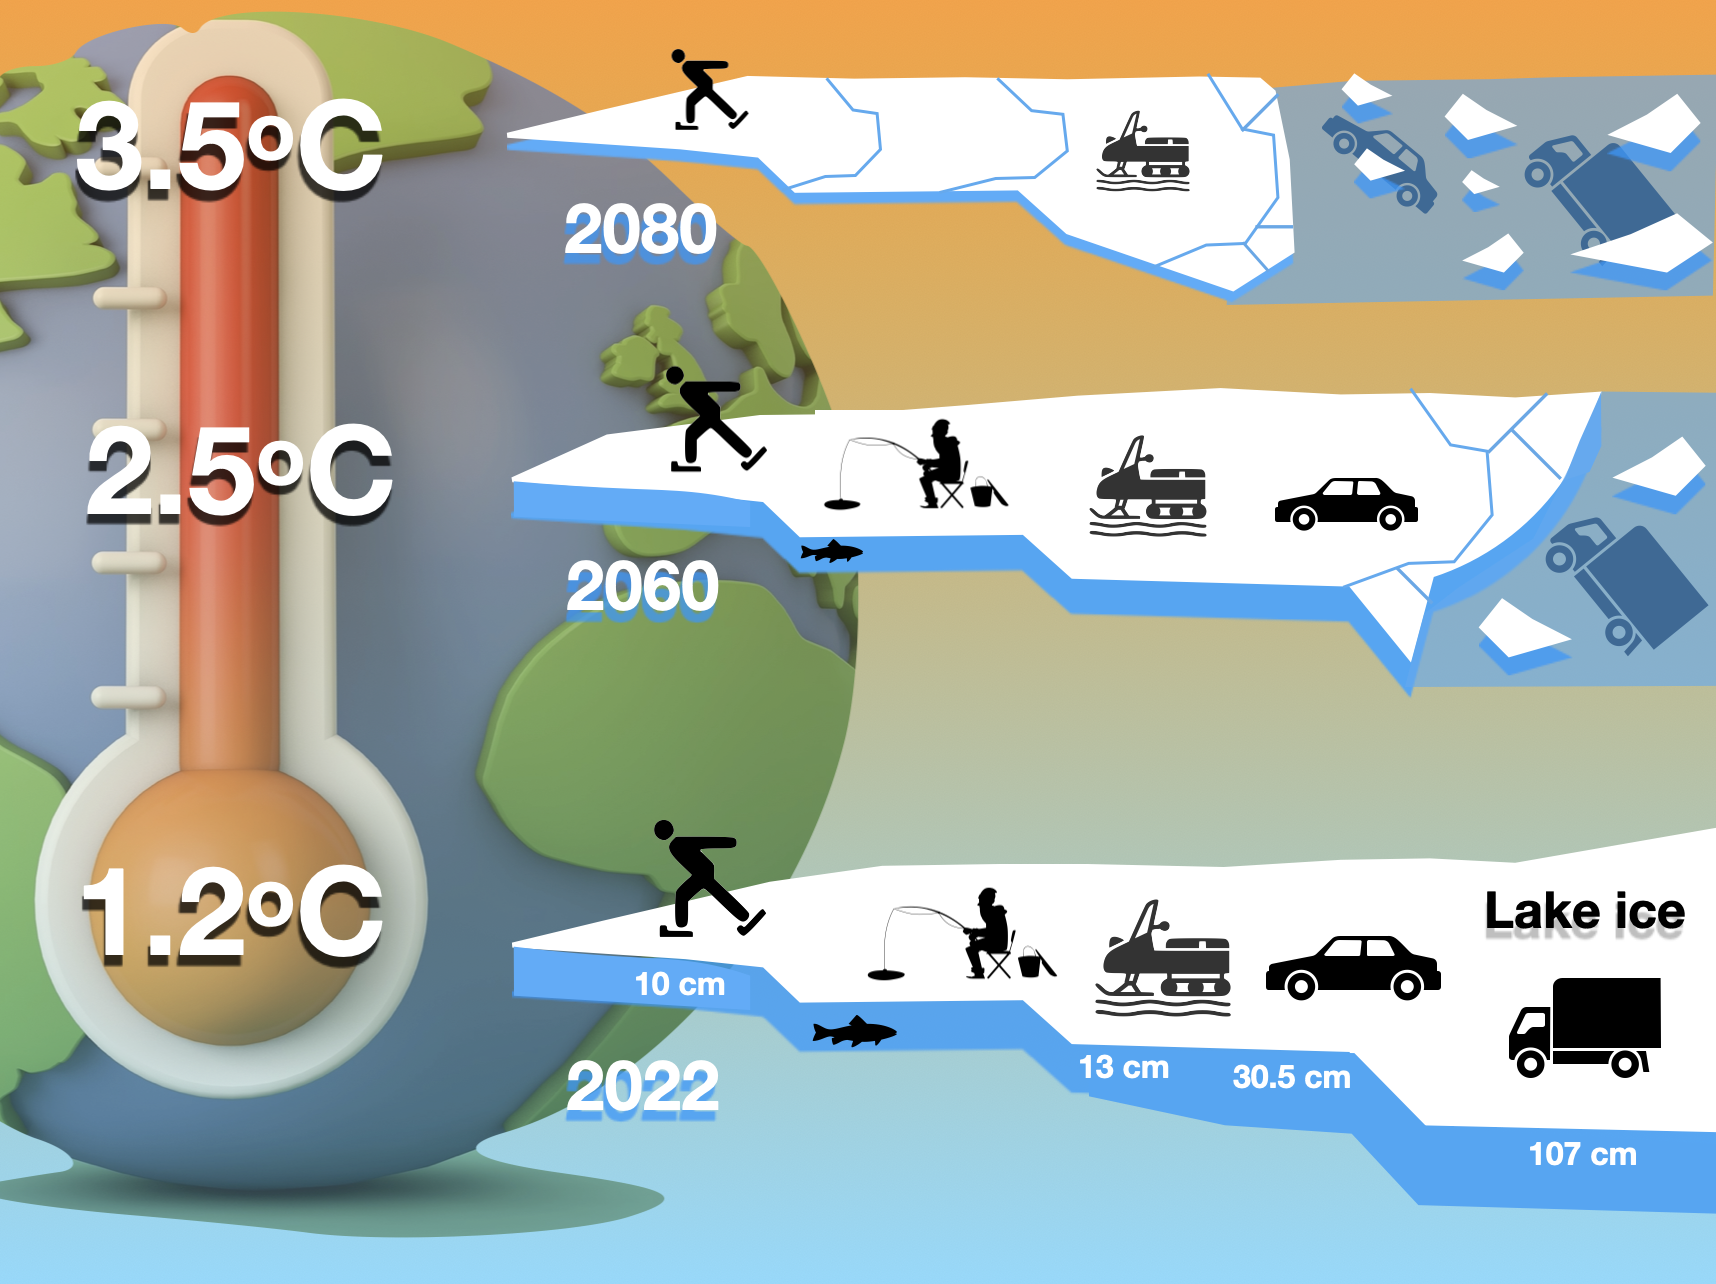 Figure: Schematic illustration of the effects of Global Warming on future lake-ice conditions and anticipated impacts on transportation and recreational activities. Warming levels are given relative to the long-term climate mean of 1900-1929 (Background graphics, licensed from Shutterstock.com).0
            